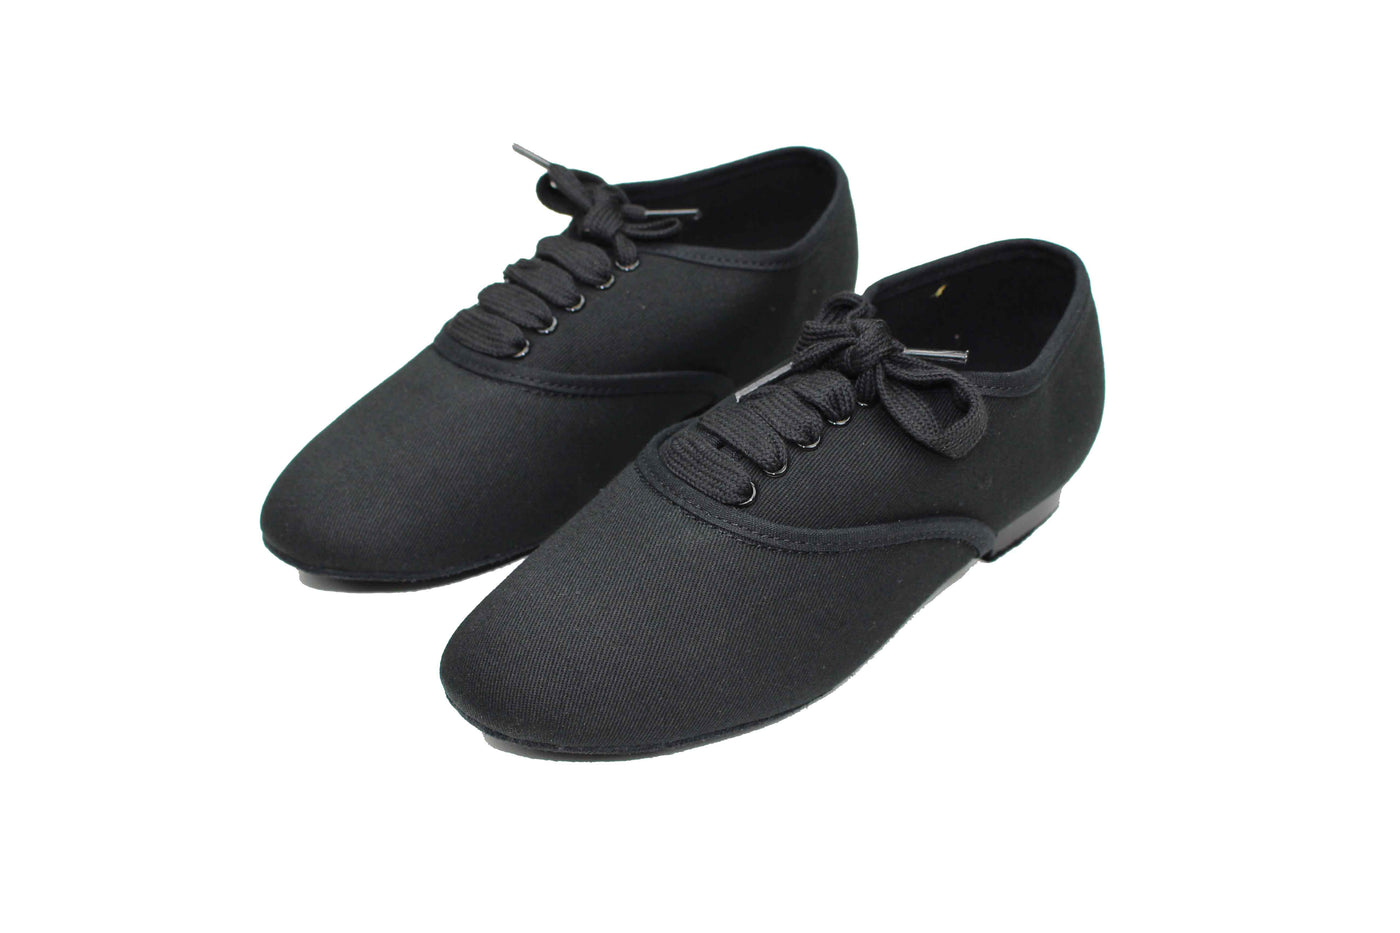 Boys Low Heel Character Shoes (Oxford 